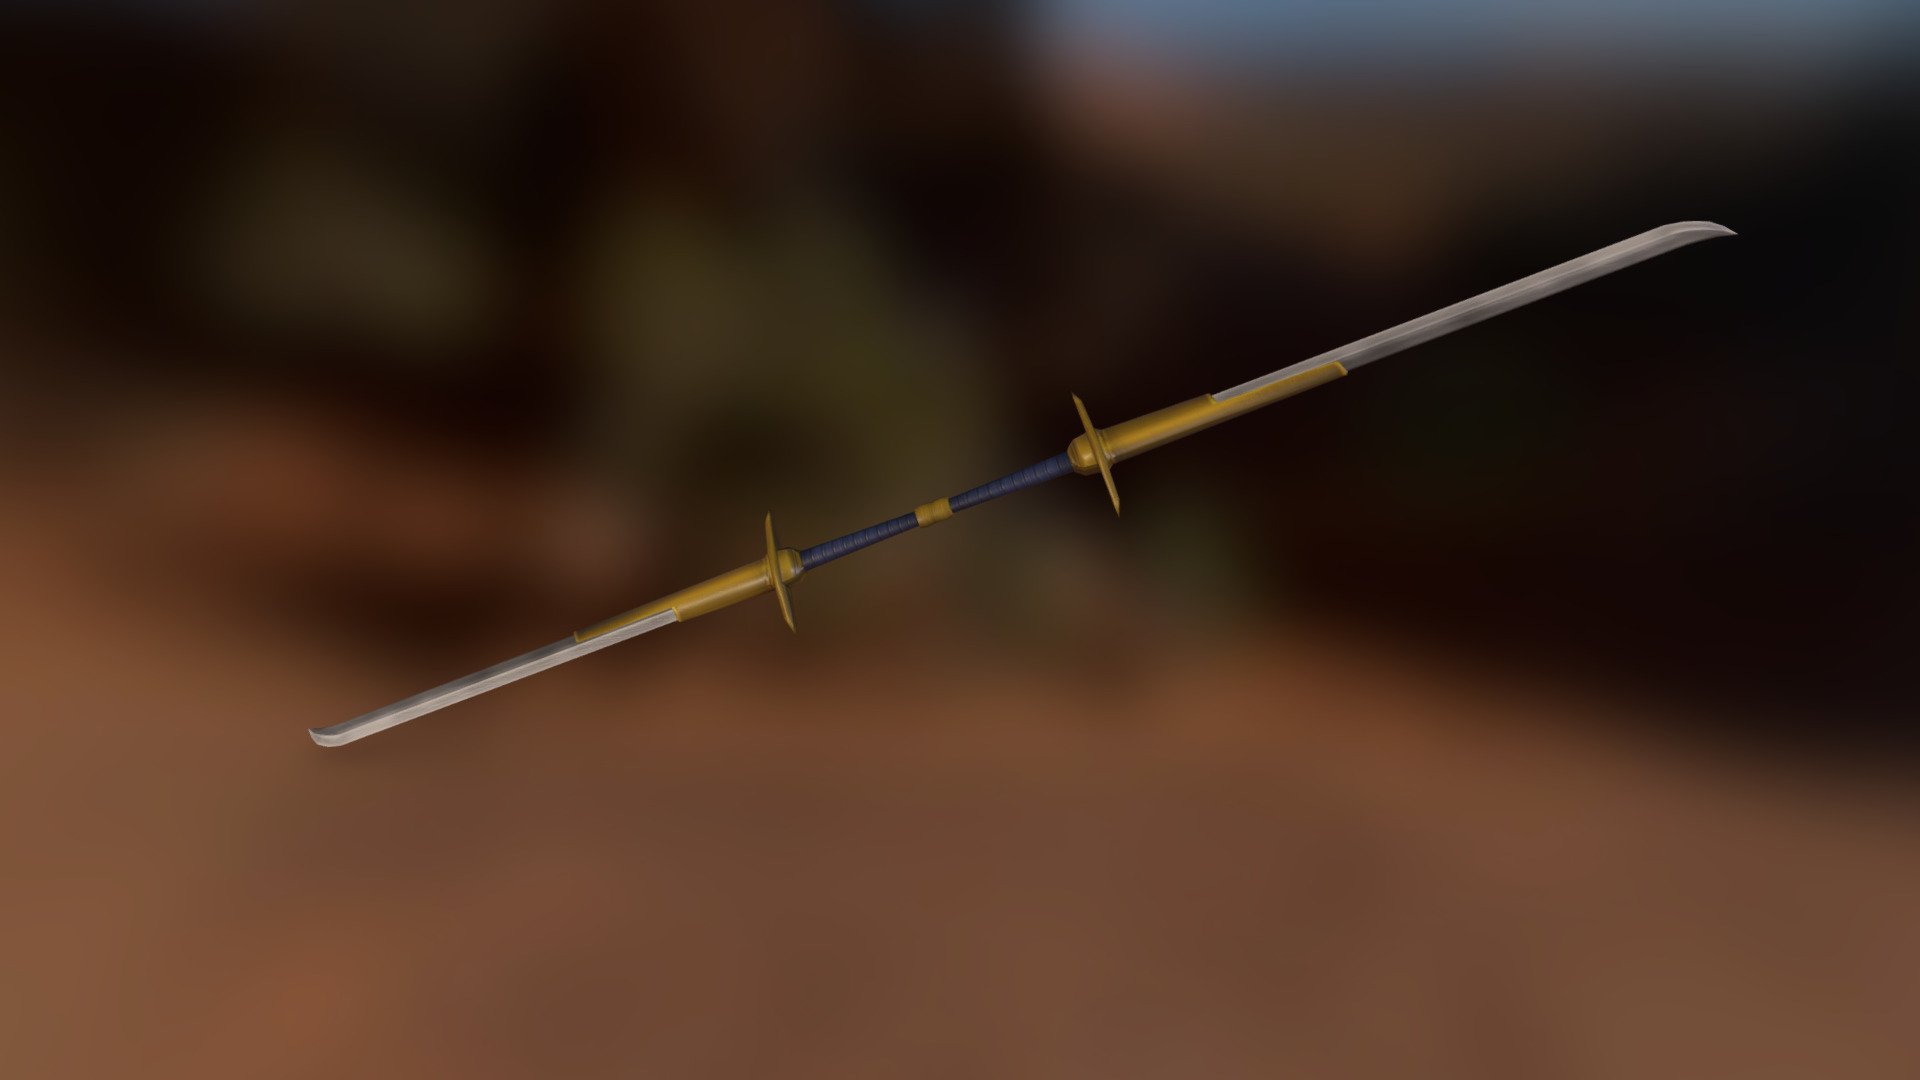 Melee weapon from KotOR.

It's of quite low quality, diffuse texture only and fit for low detail usage 3d model